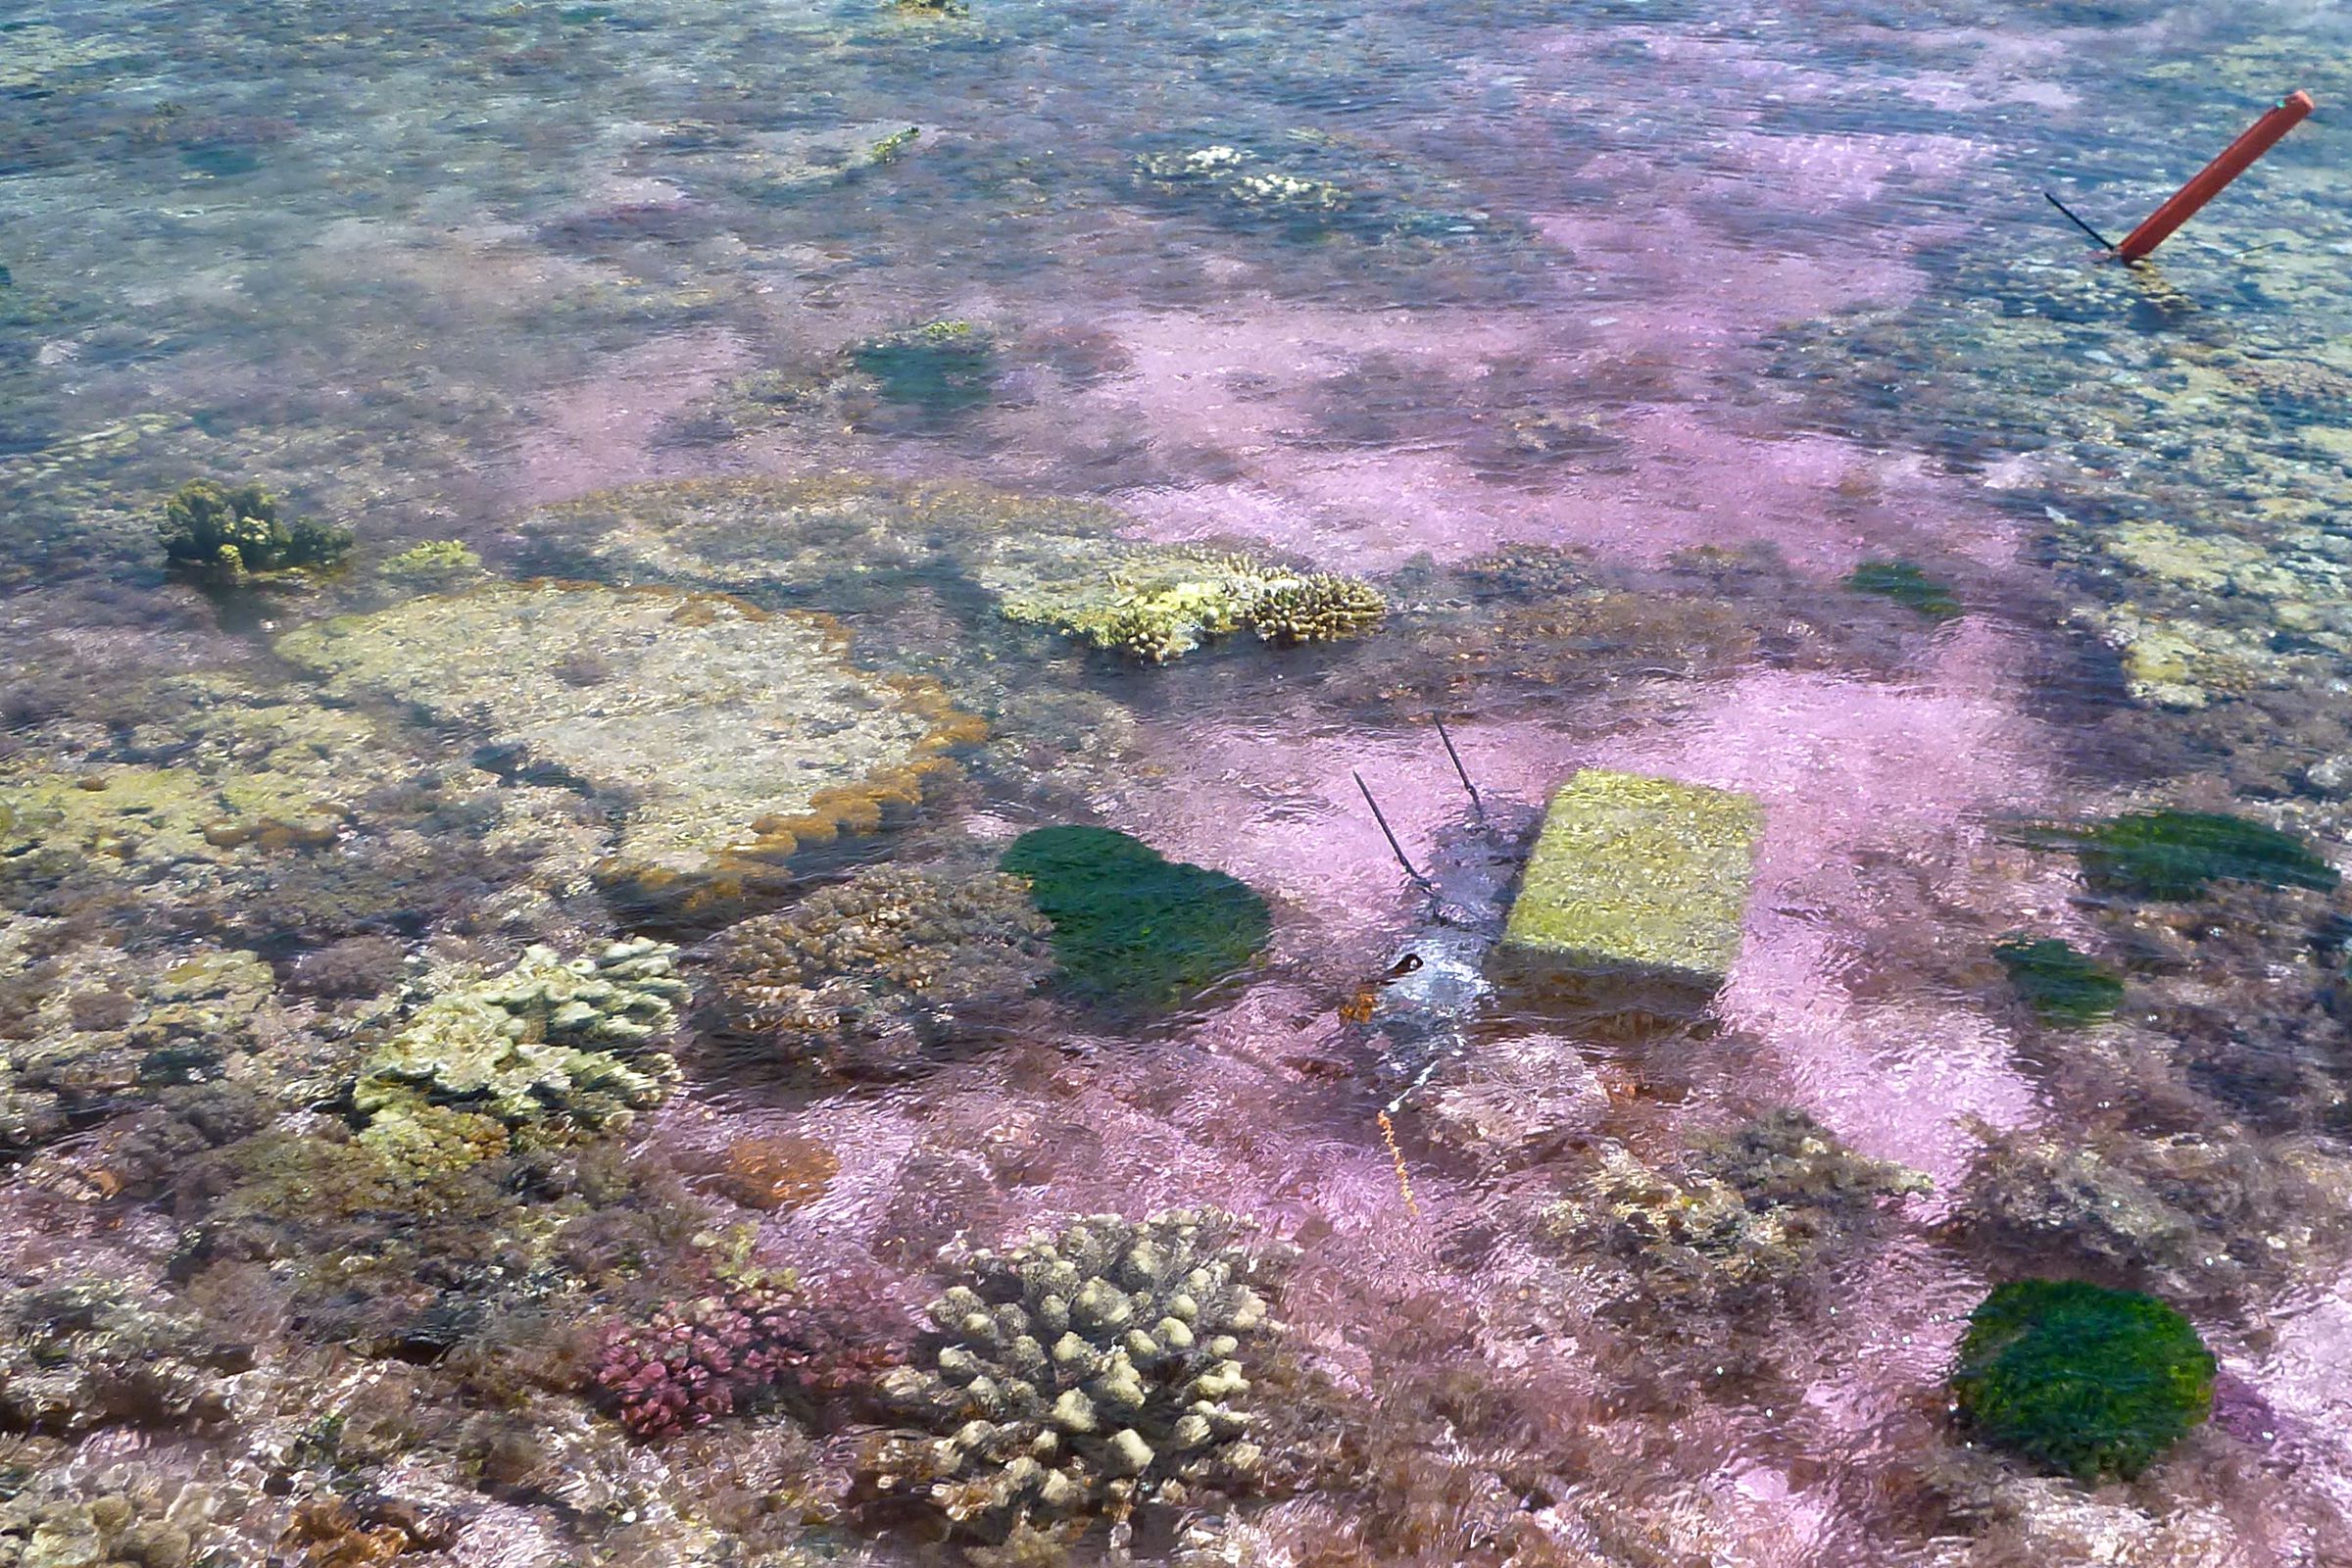 Experimental seawater flowing over the reef flat study site. A pink dye tracer was used to track the movement of seawater. 